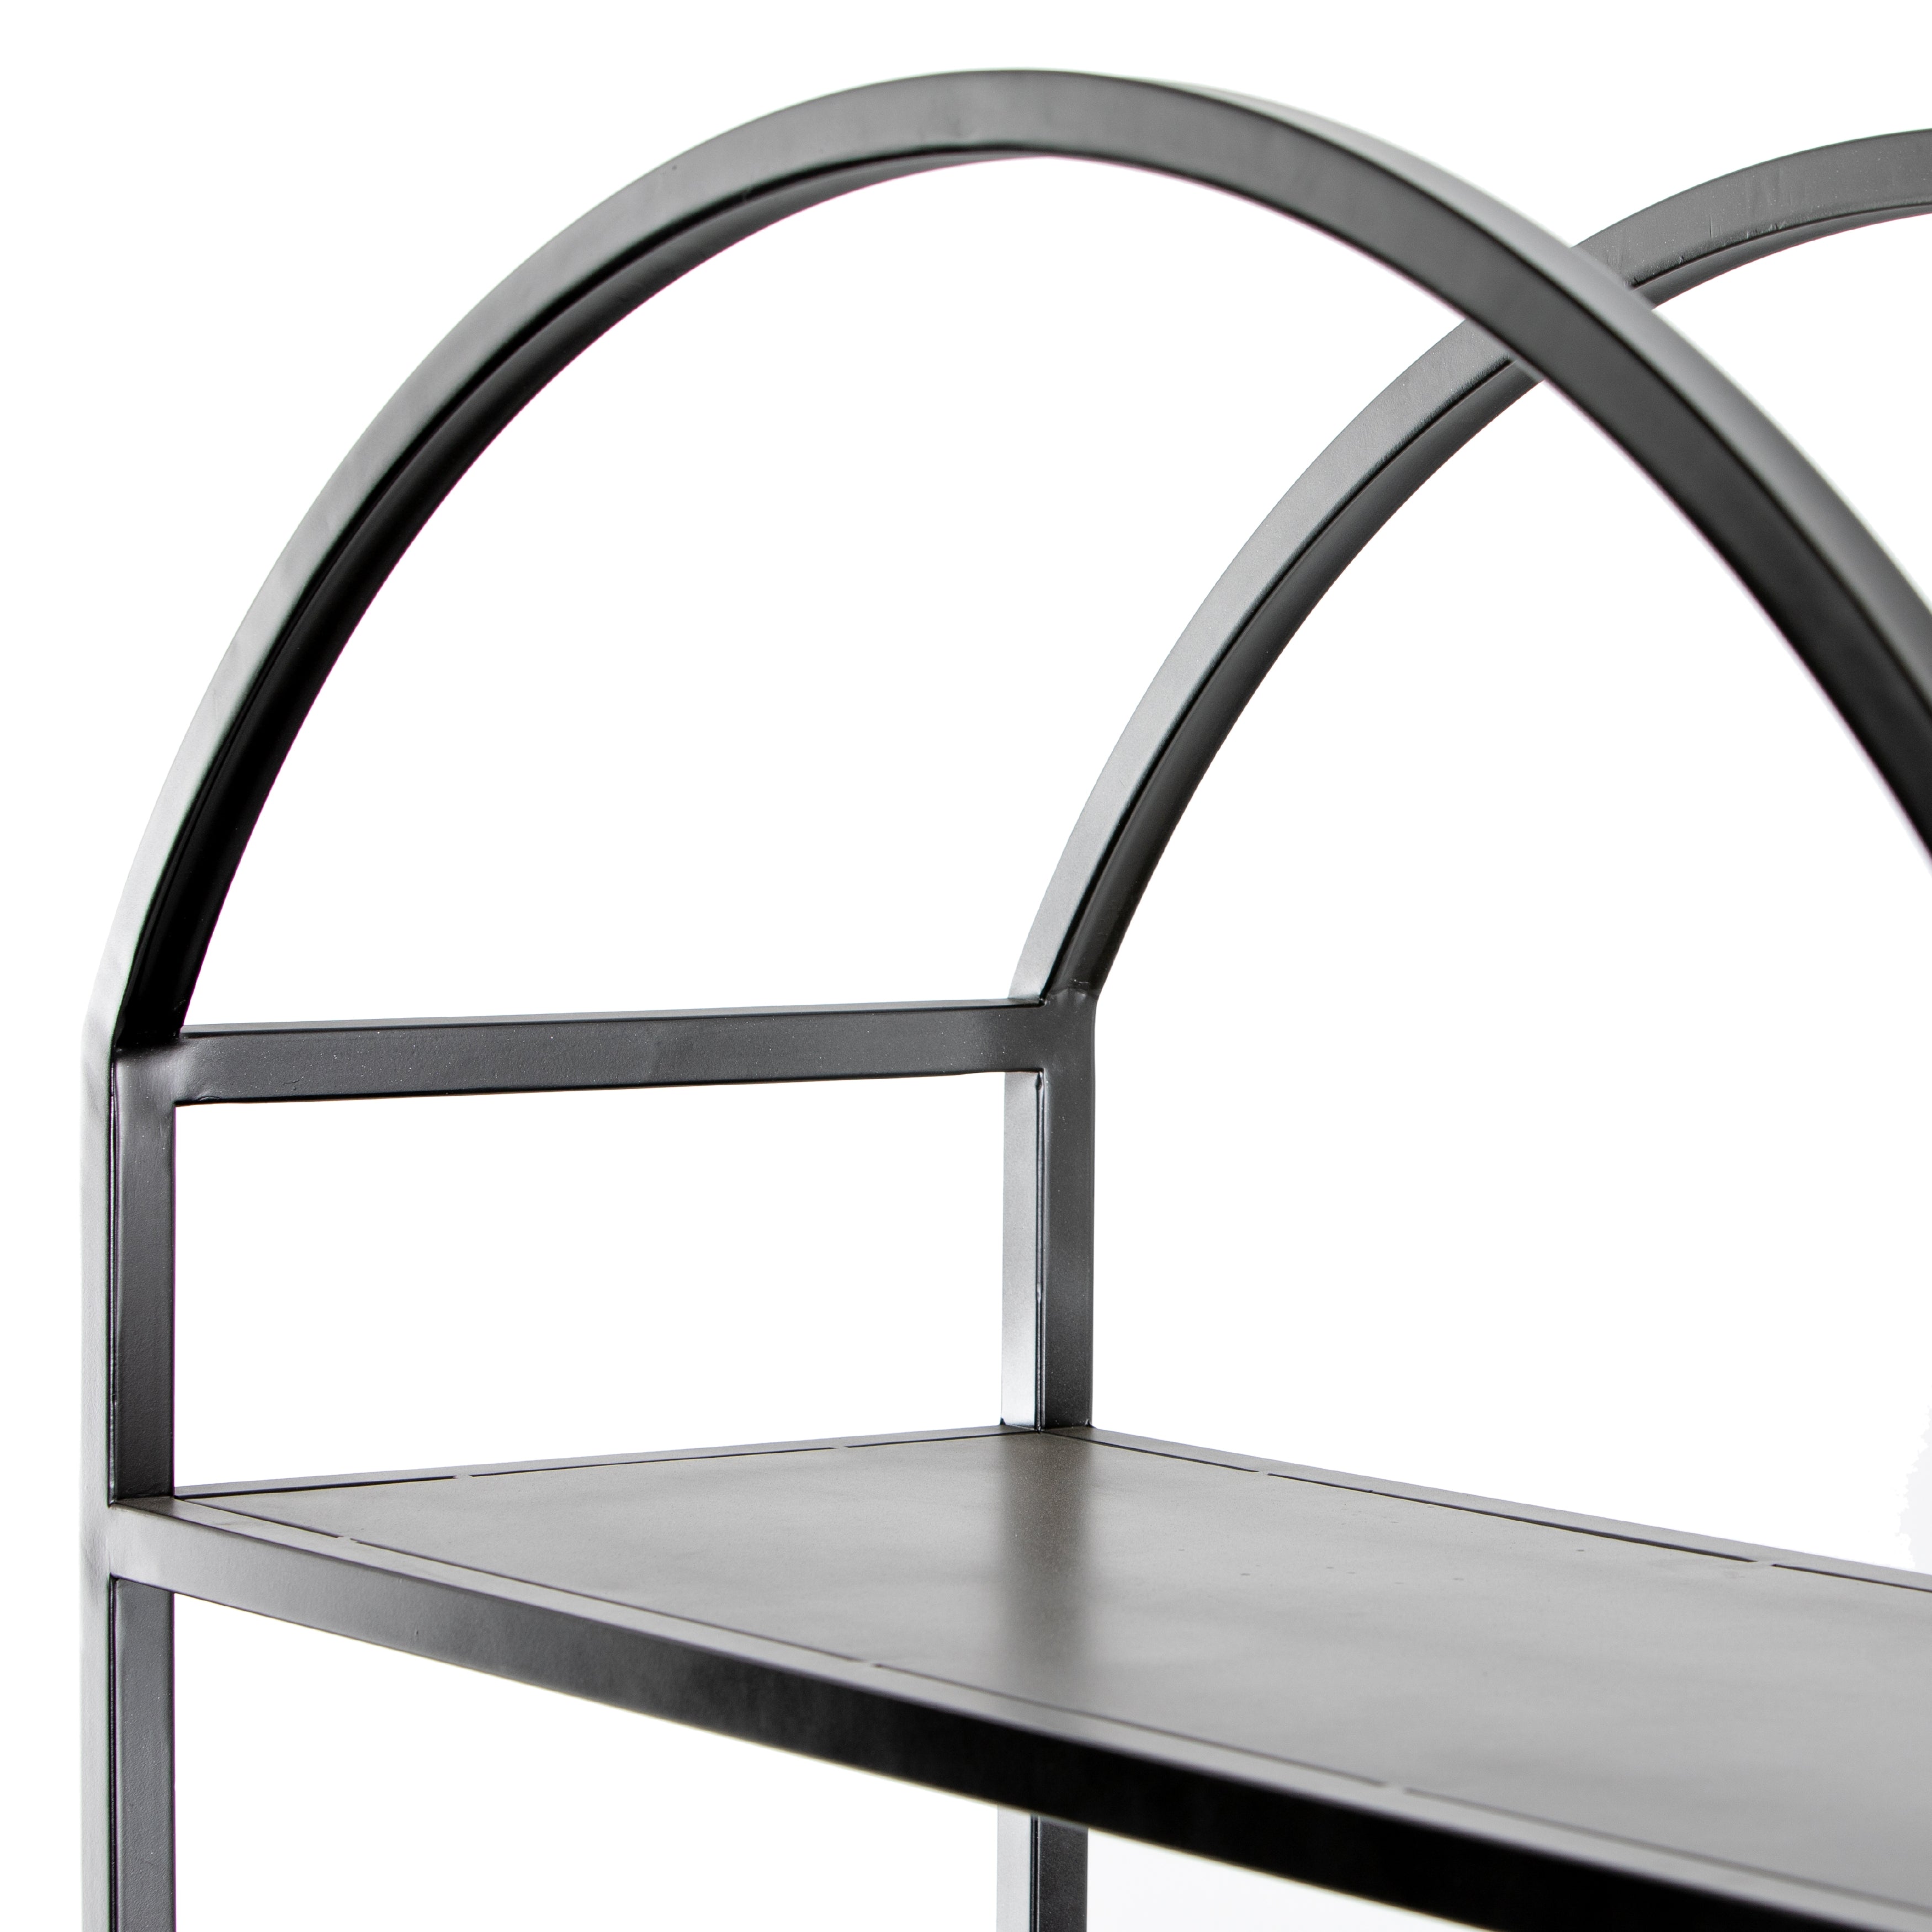 This Loomis Bookcase - Black is sleek, simple and beautifully on-trend. Black-finished iron forms an airy open frame, with an arched top for modernity in any office, living, or other space!  Overall Dimensions: 39.50"w x 15.75"d x 93.00"h